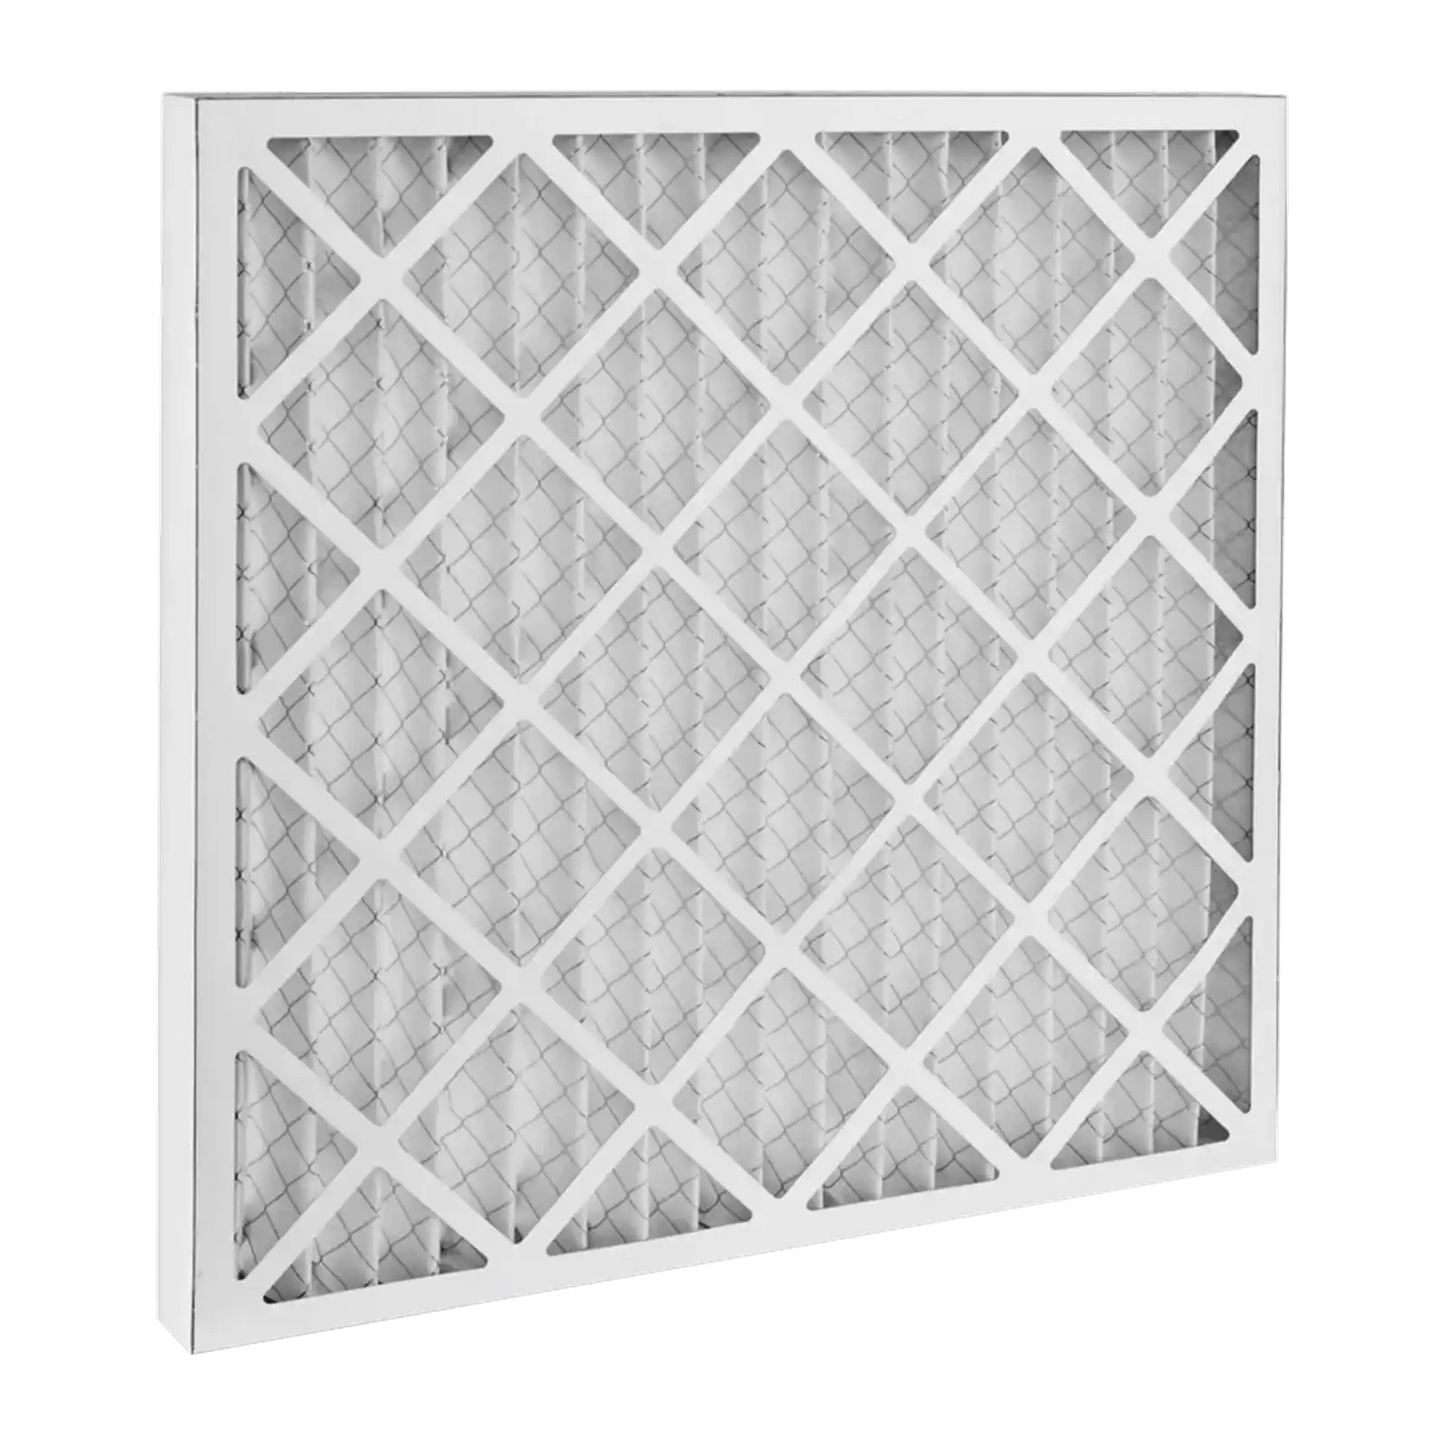 Dafco 18x24x1 Furnace AC Filter - Case of 12